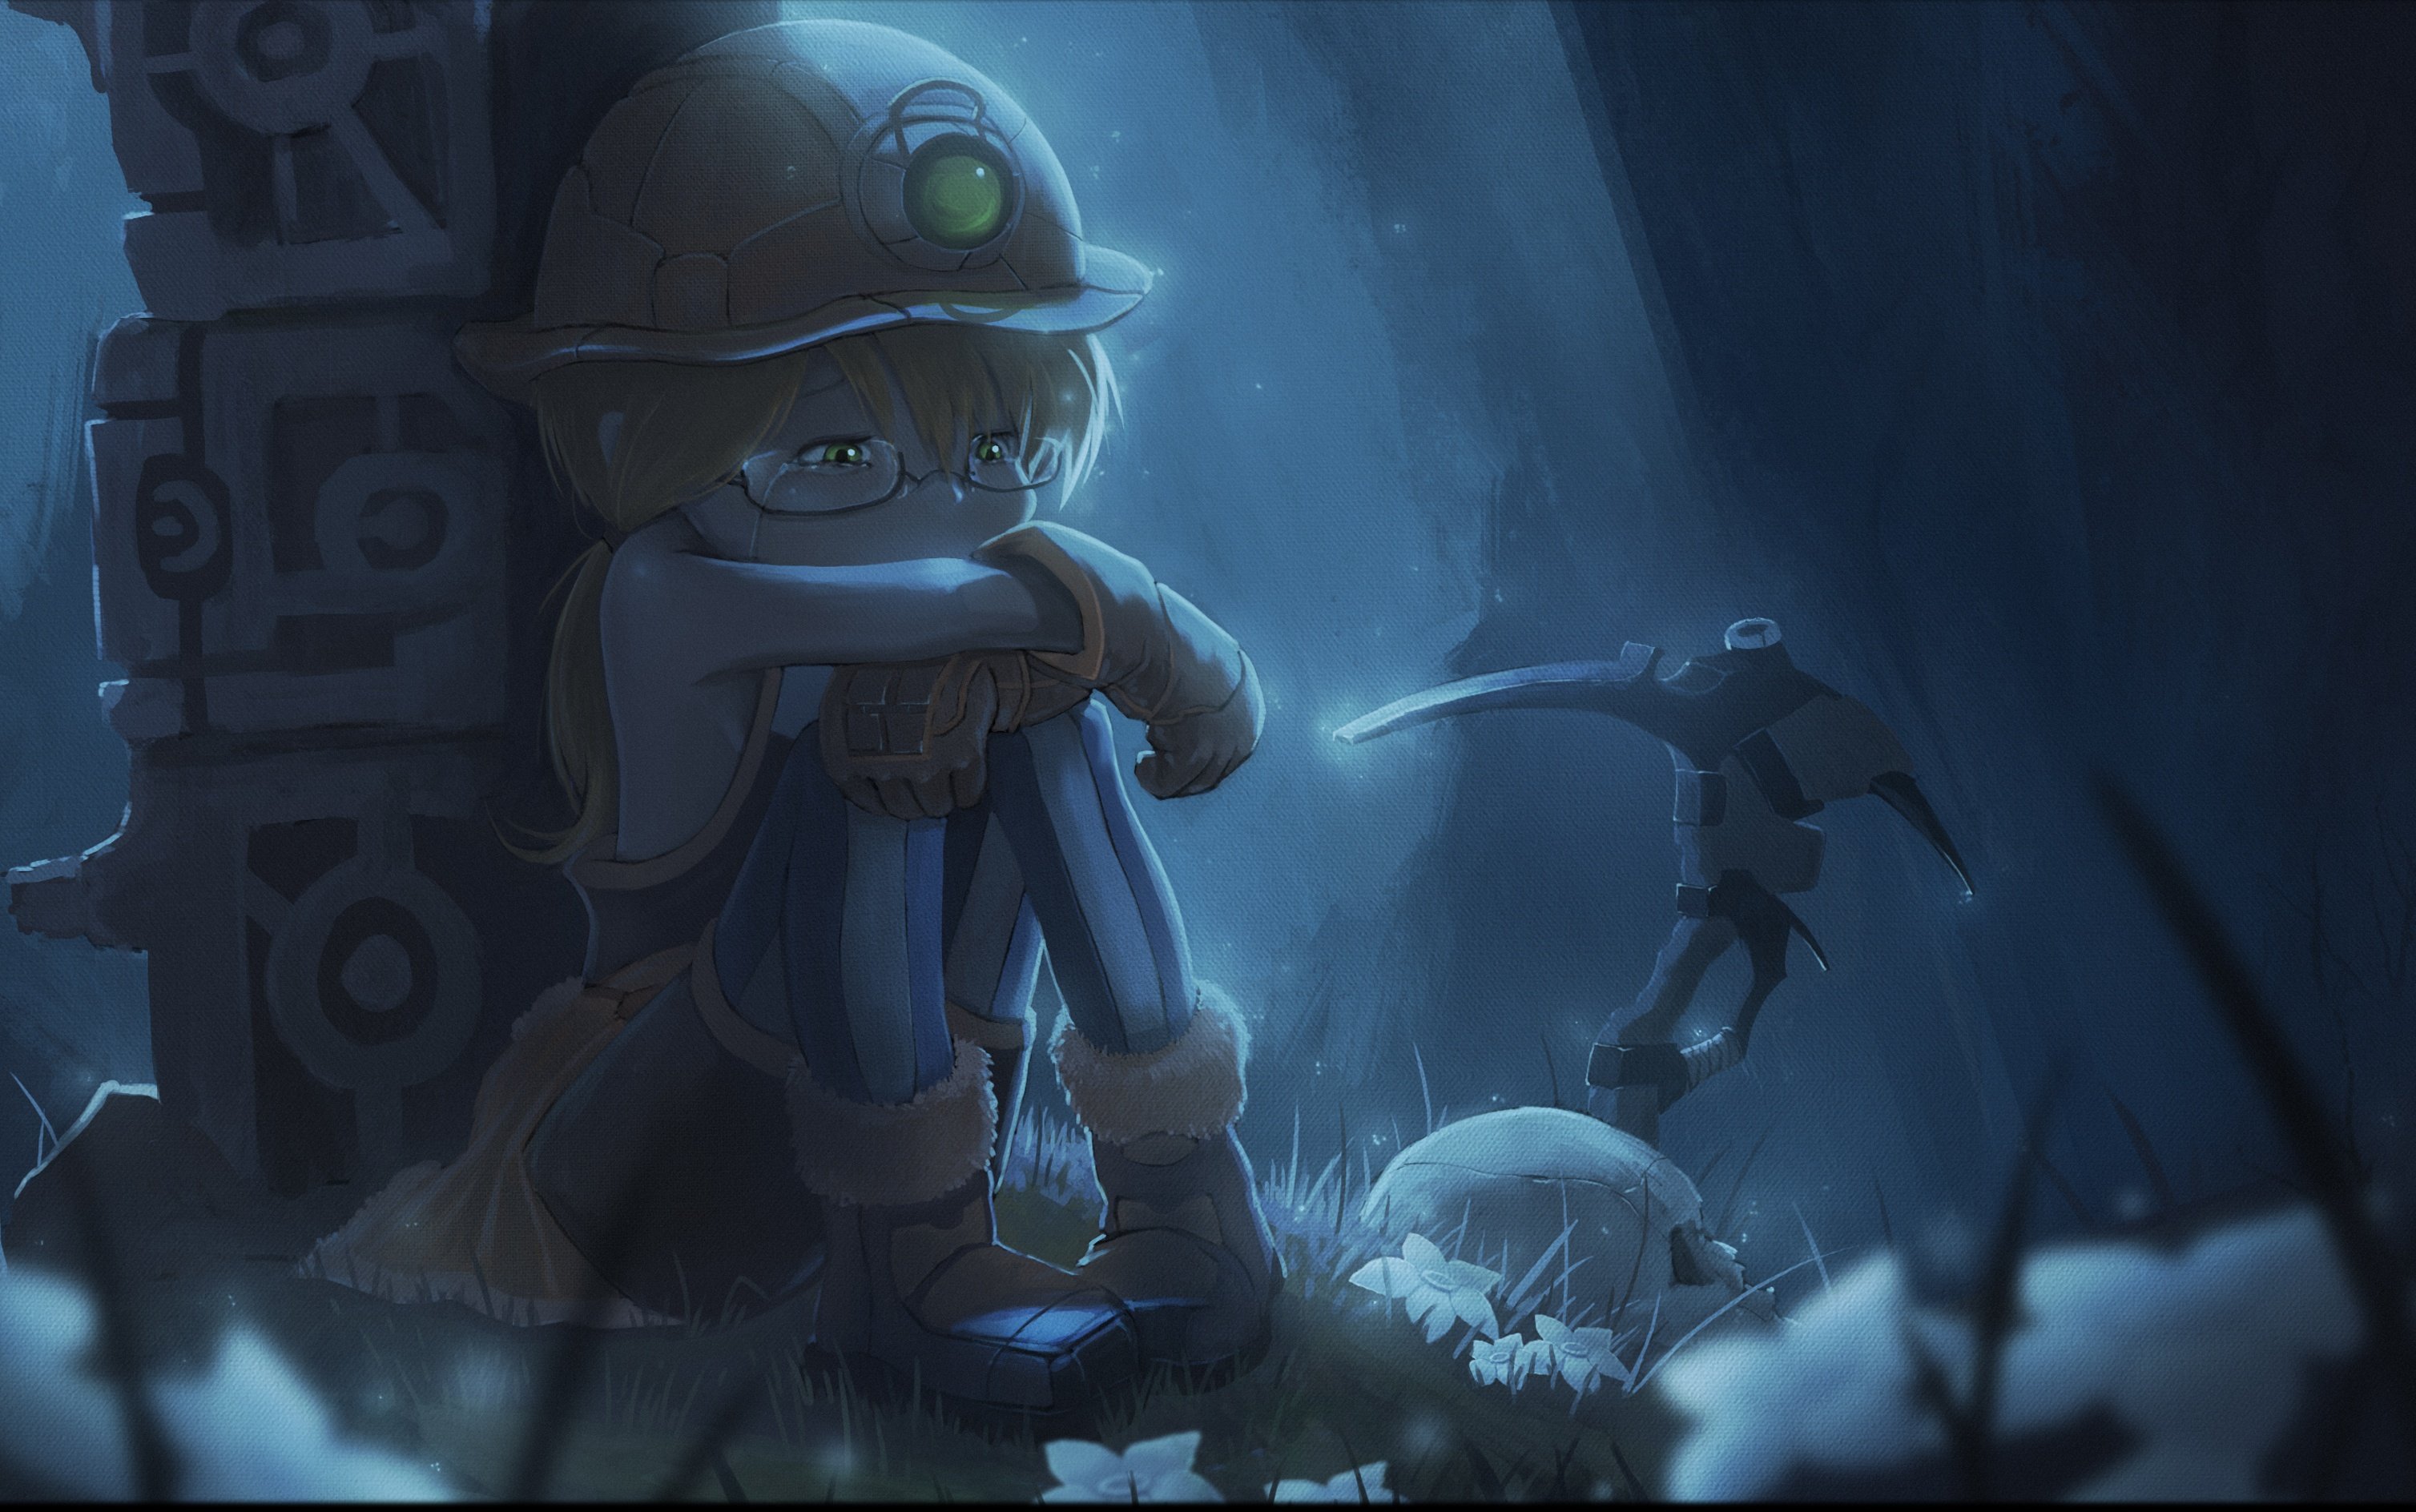 Wallpaper, Riko Made in Abyss, Made in Abyss, pickaxes, Miner